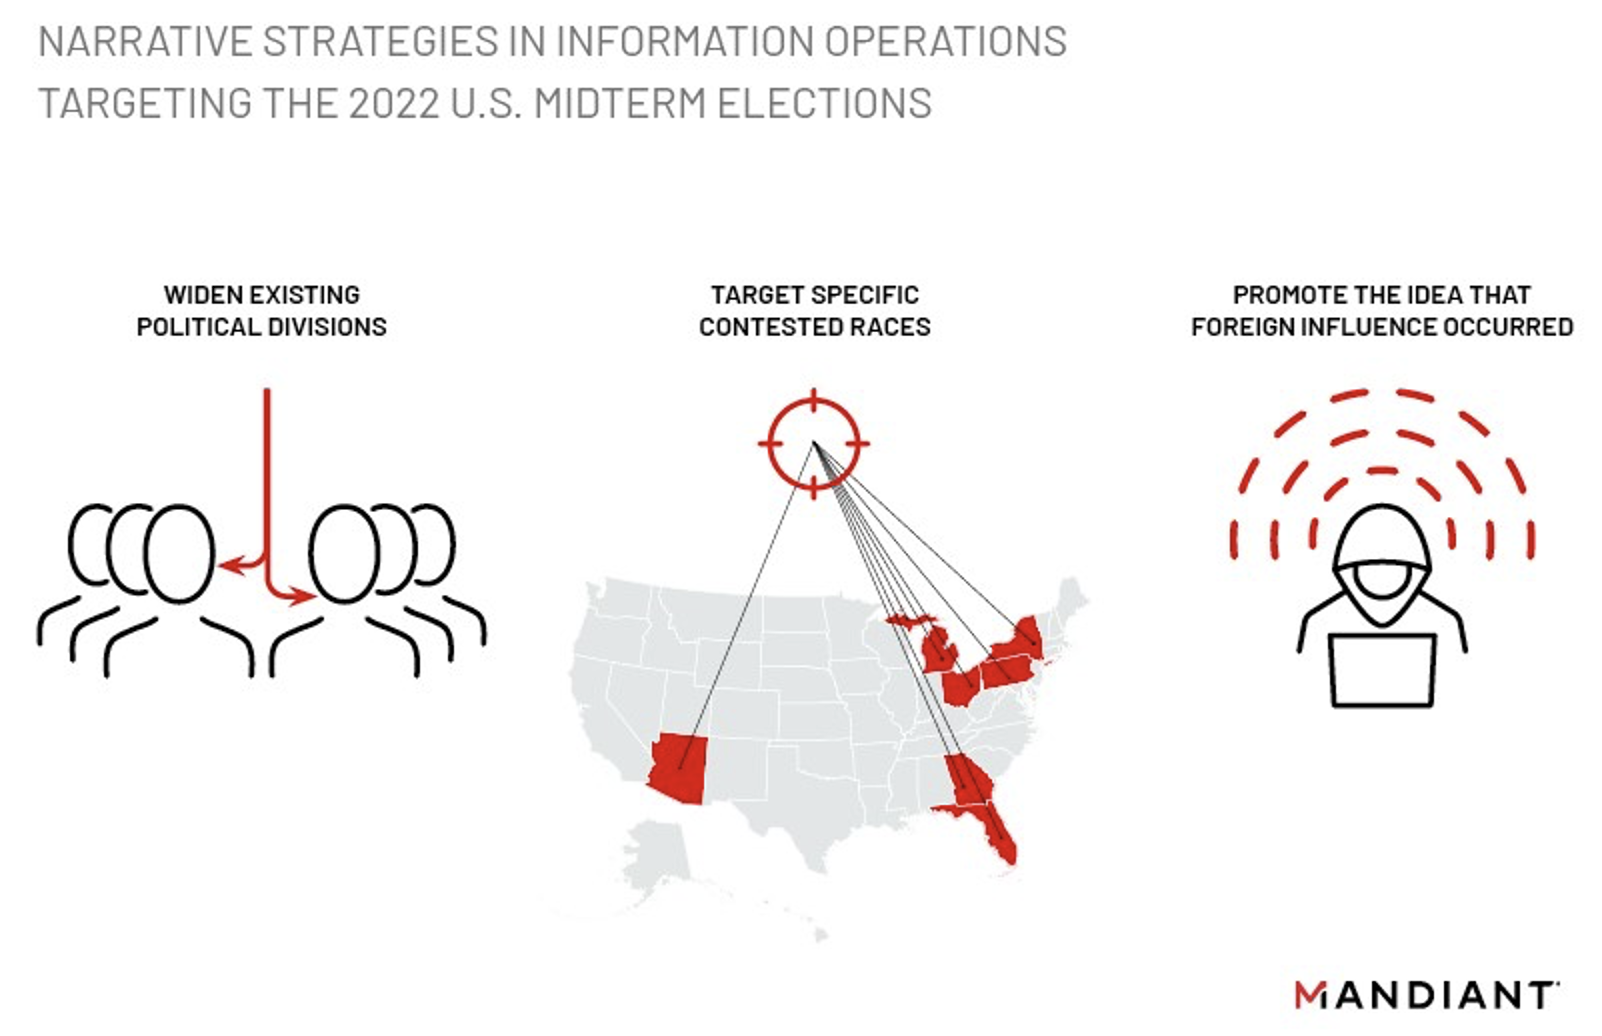 Observed narrative strategies for identified information operations targeting the midterms (note: center graphic is not a comprehensive map of targeted races)